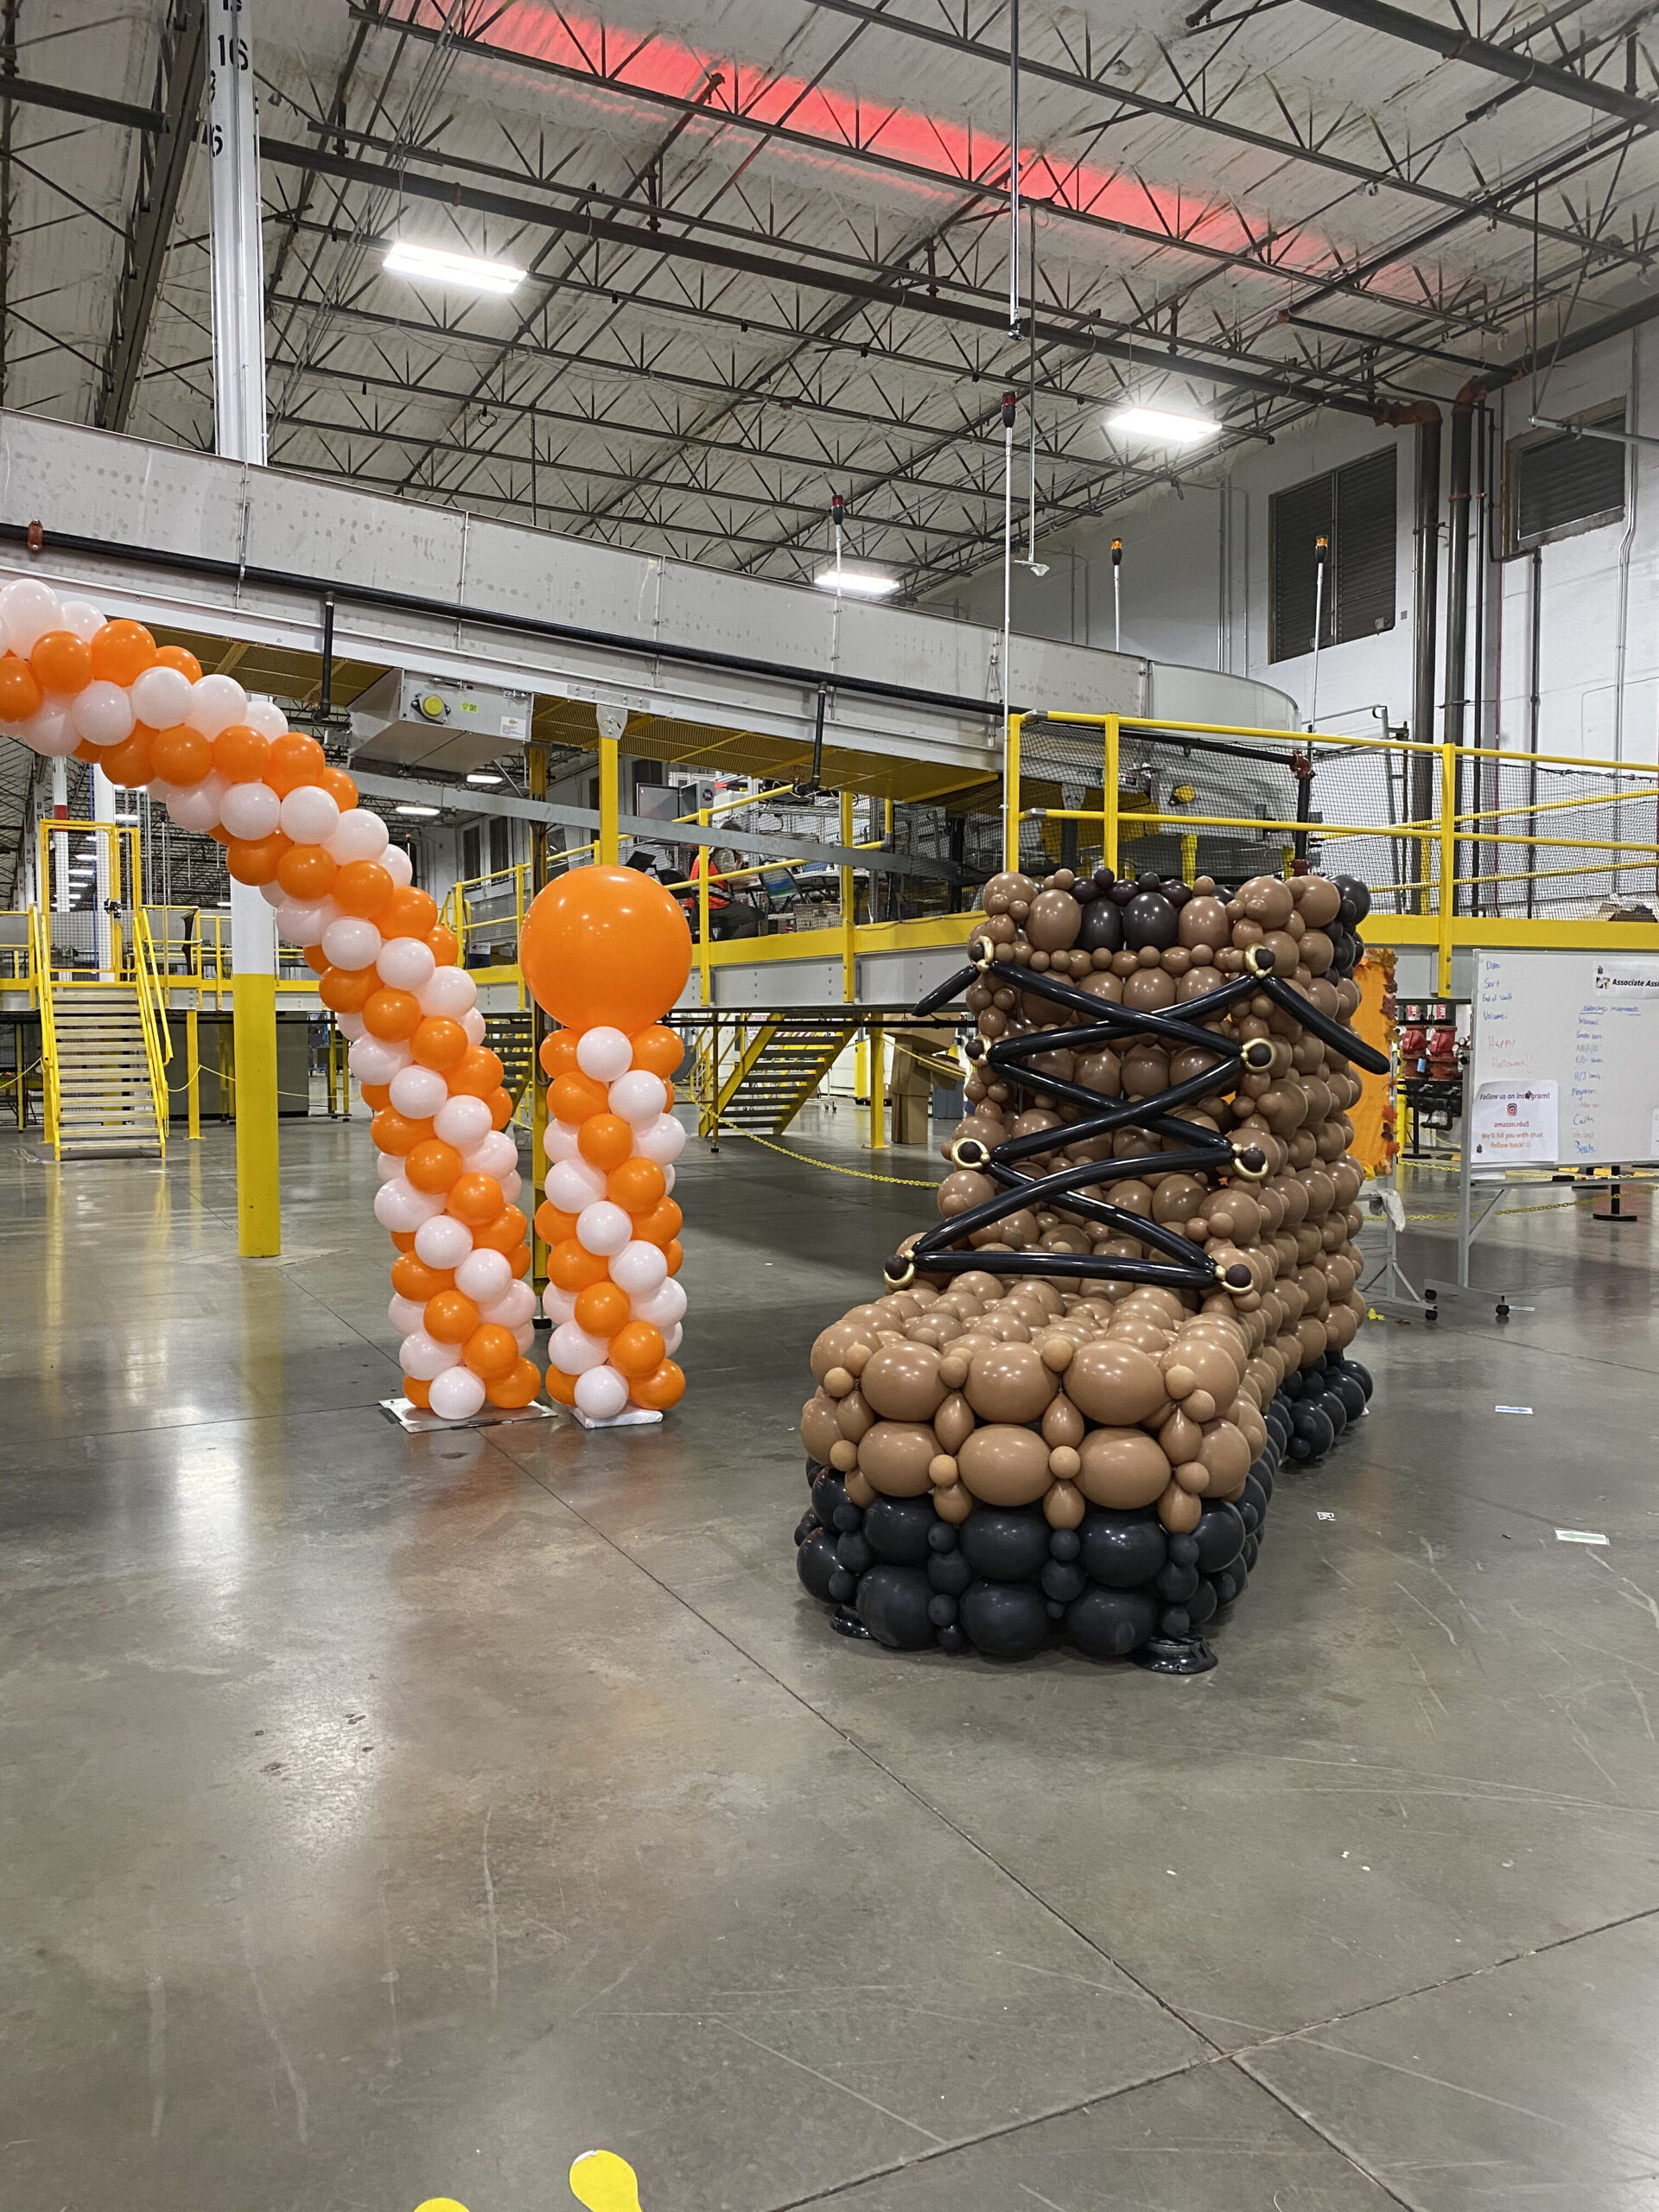 Balloon arrangements for corporate event decorations in Raleigh, NC